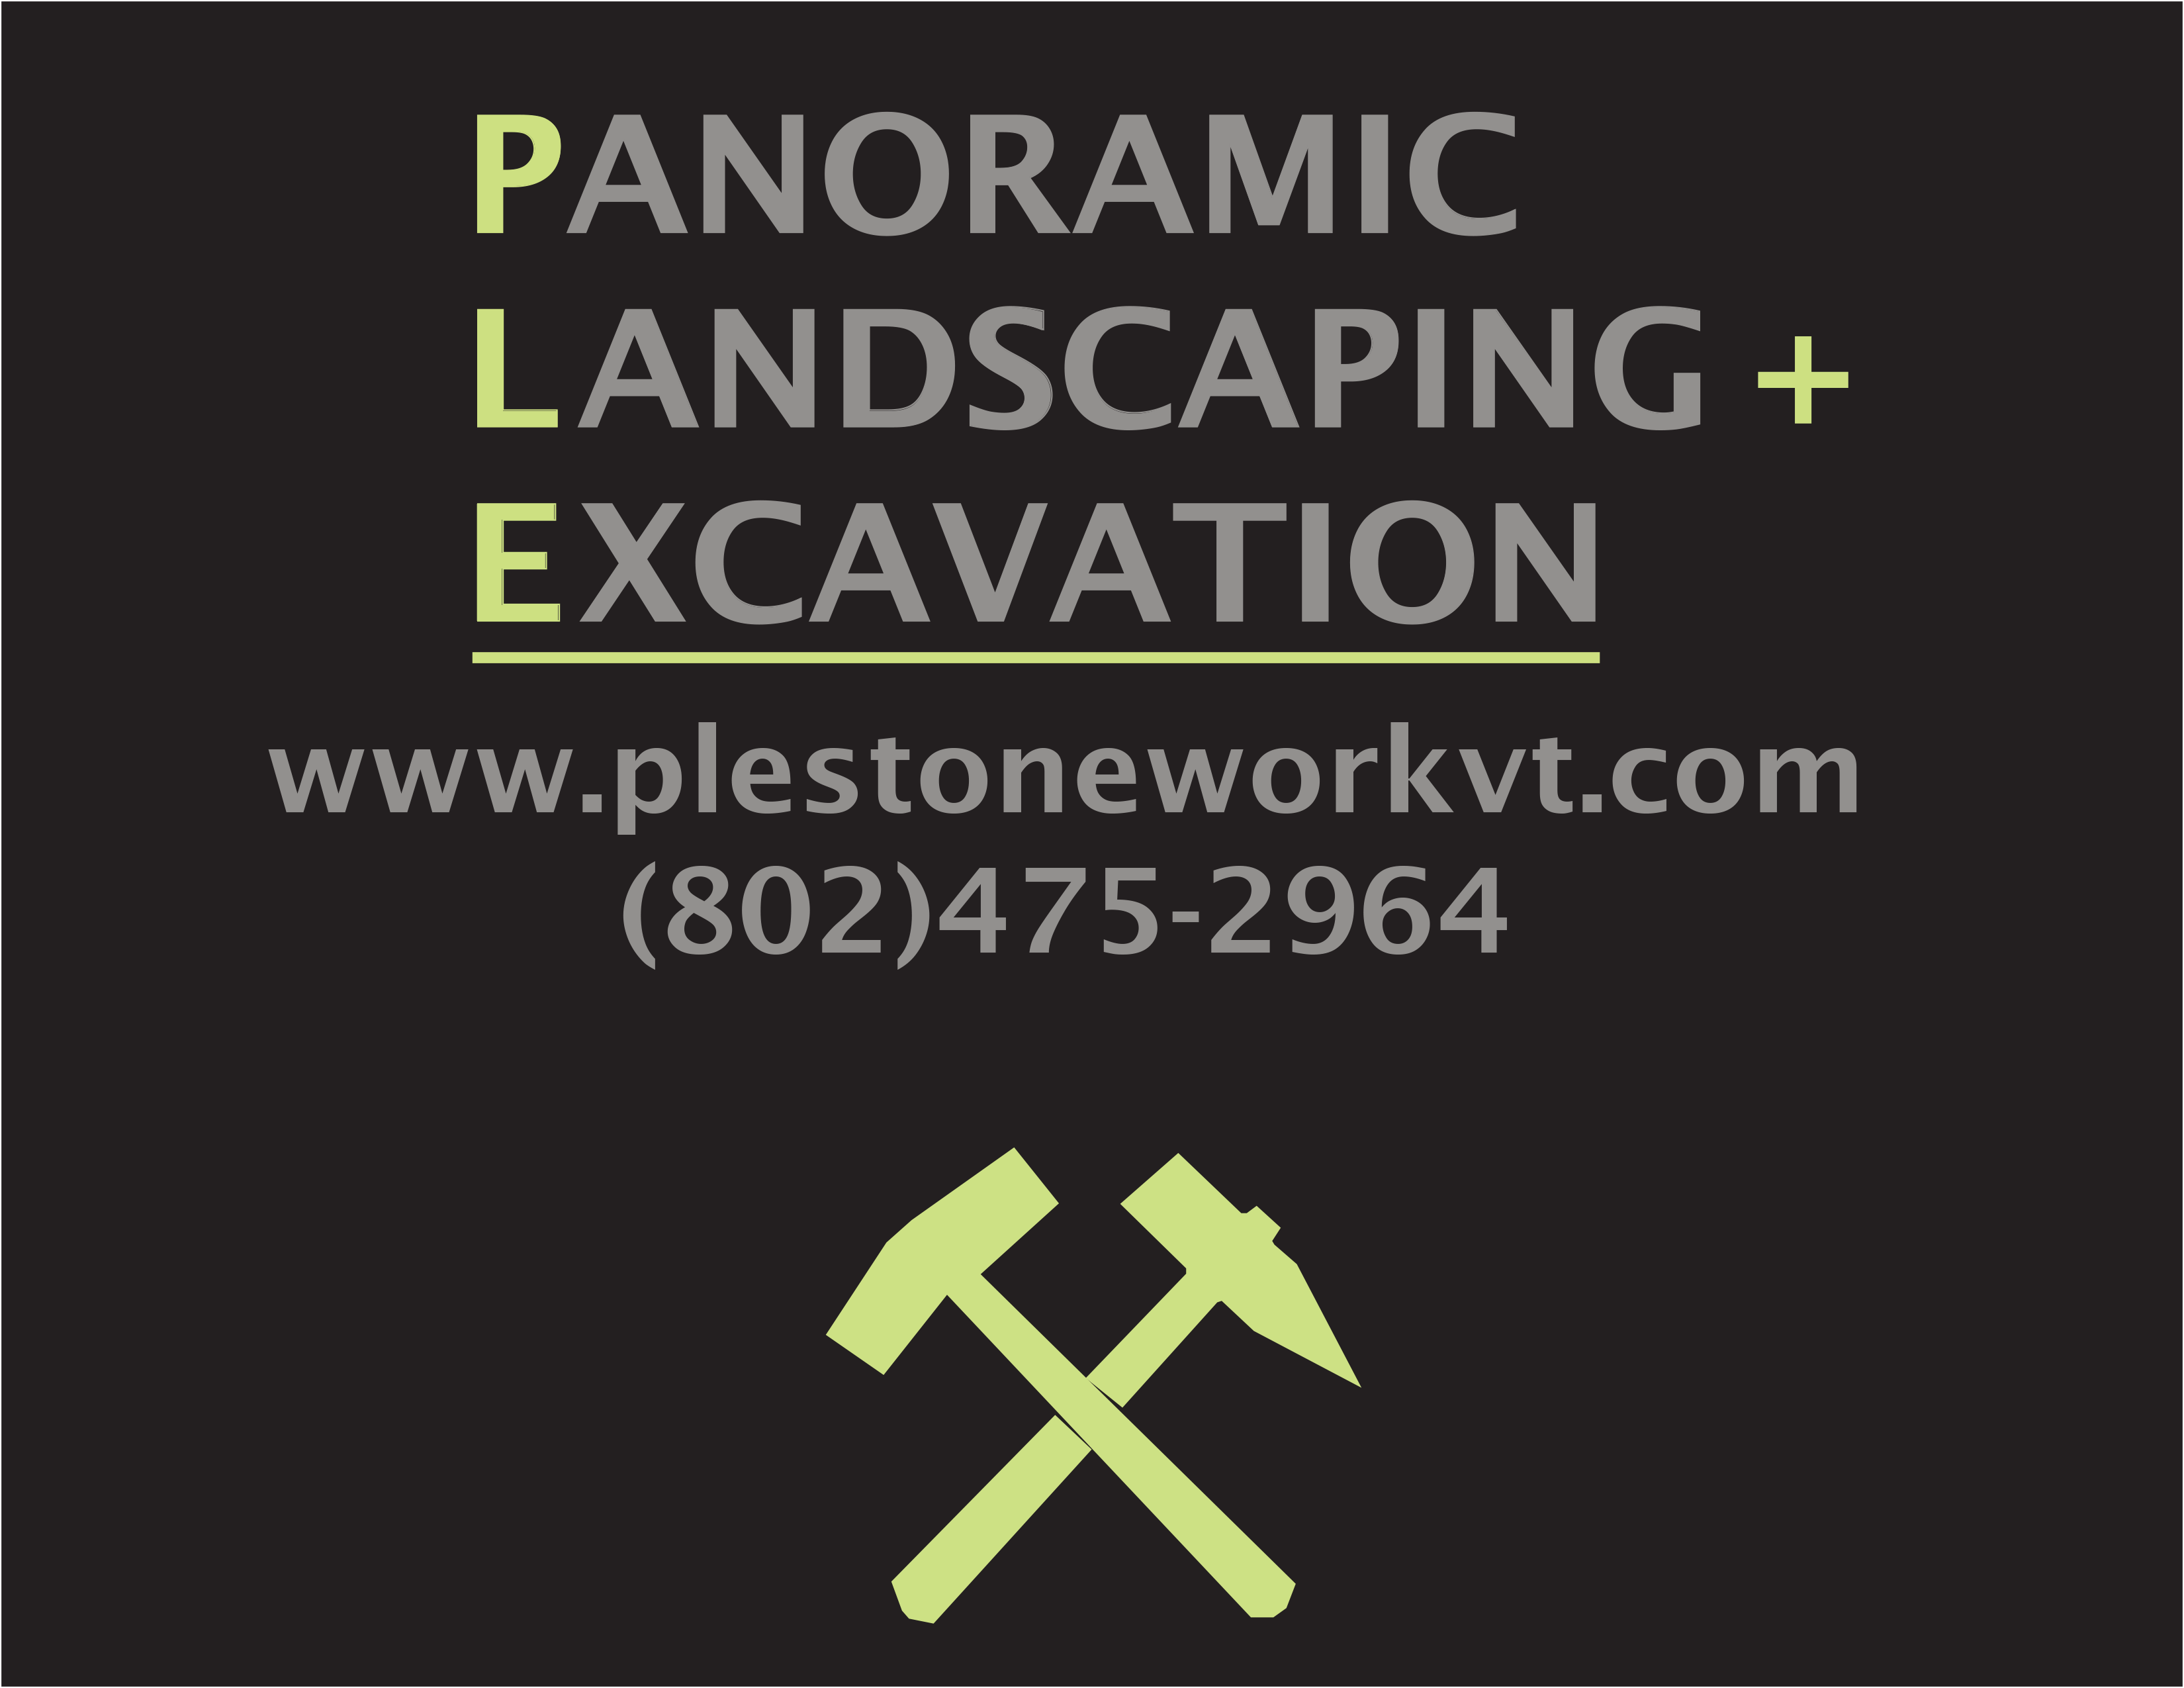 Panoramic Landscaping & Excavation